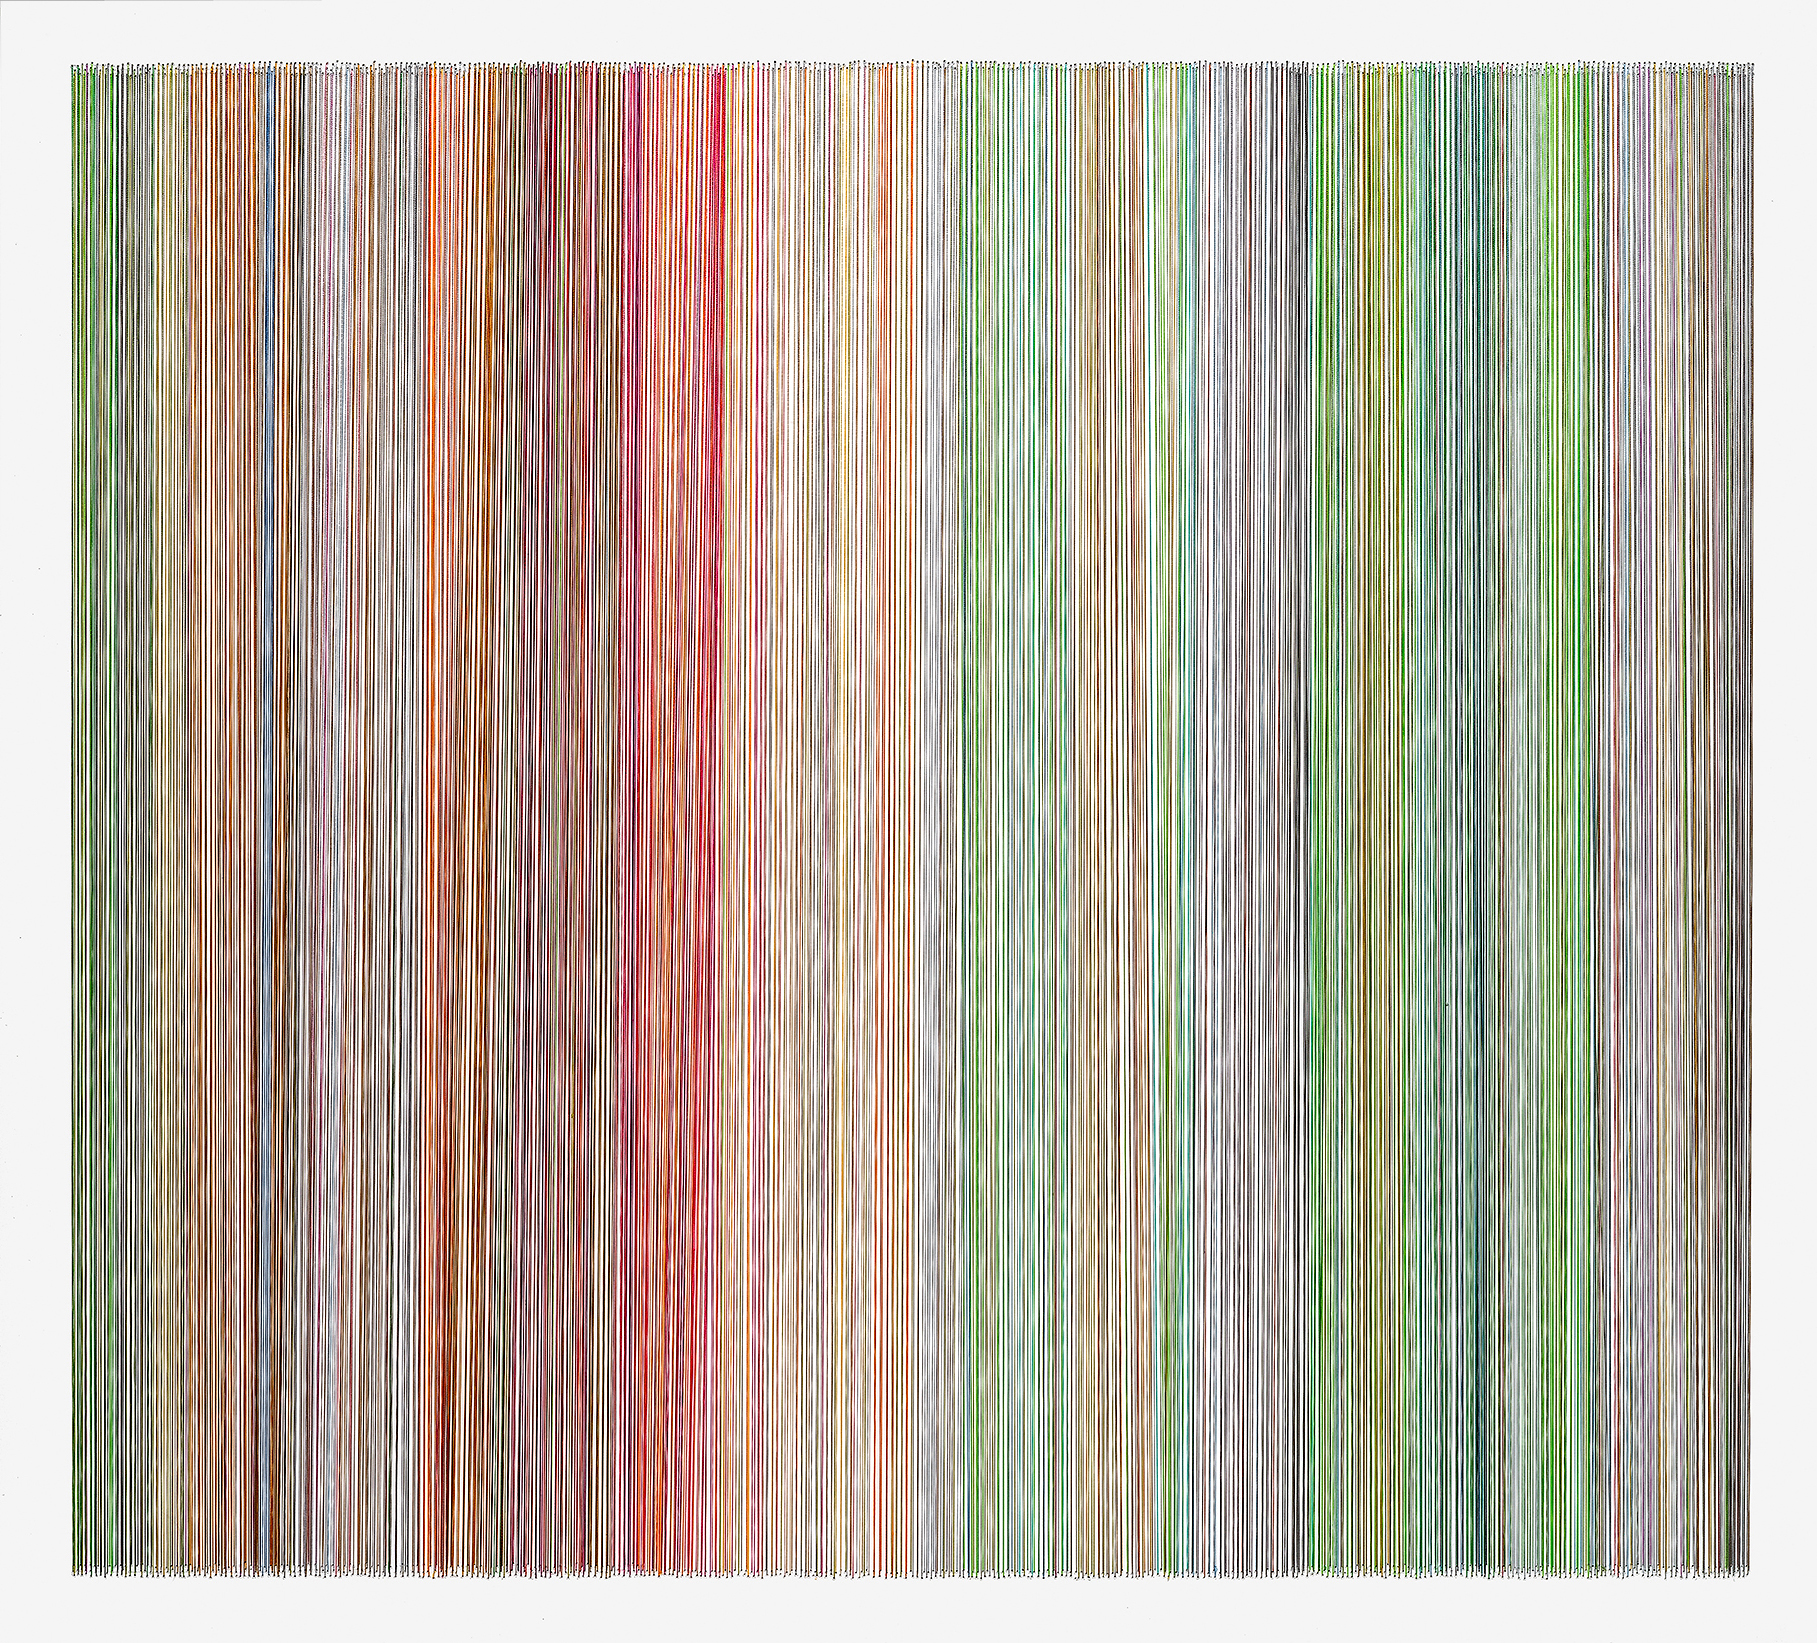    thread drawing 18   2013 rayon thread 28 x 31 inches Private Collection, Mission Hills, Kansas  